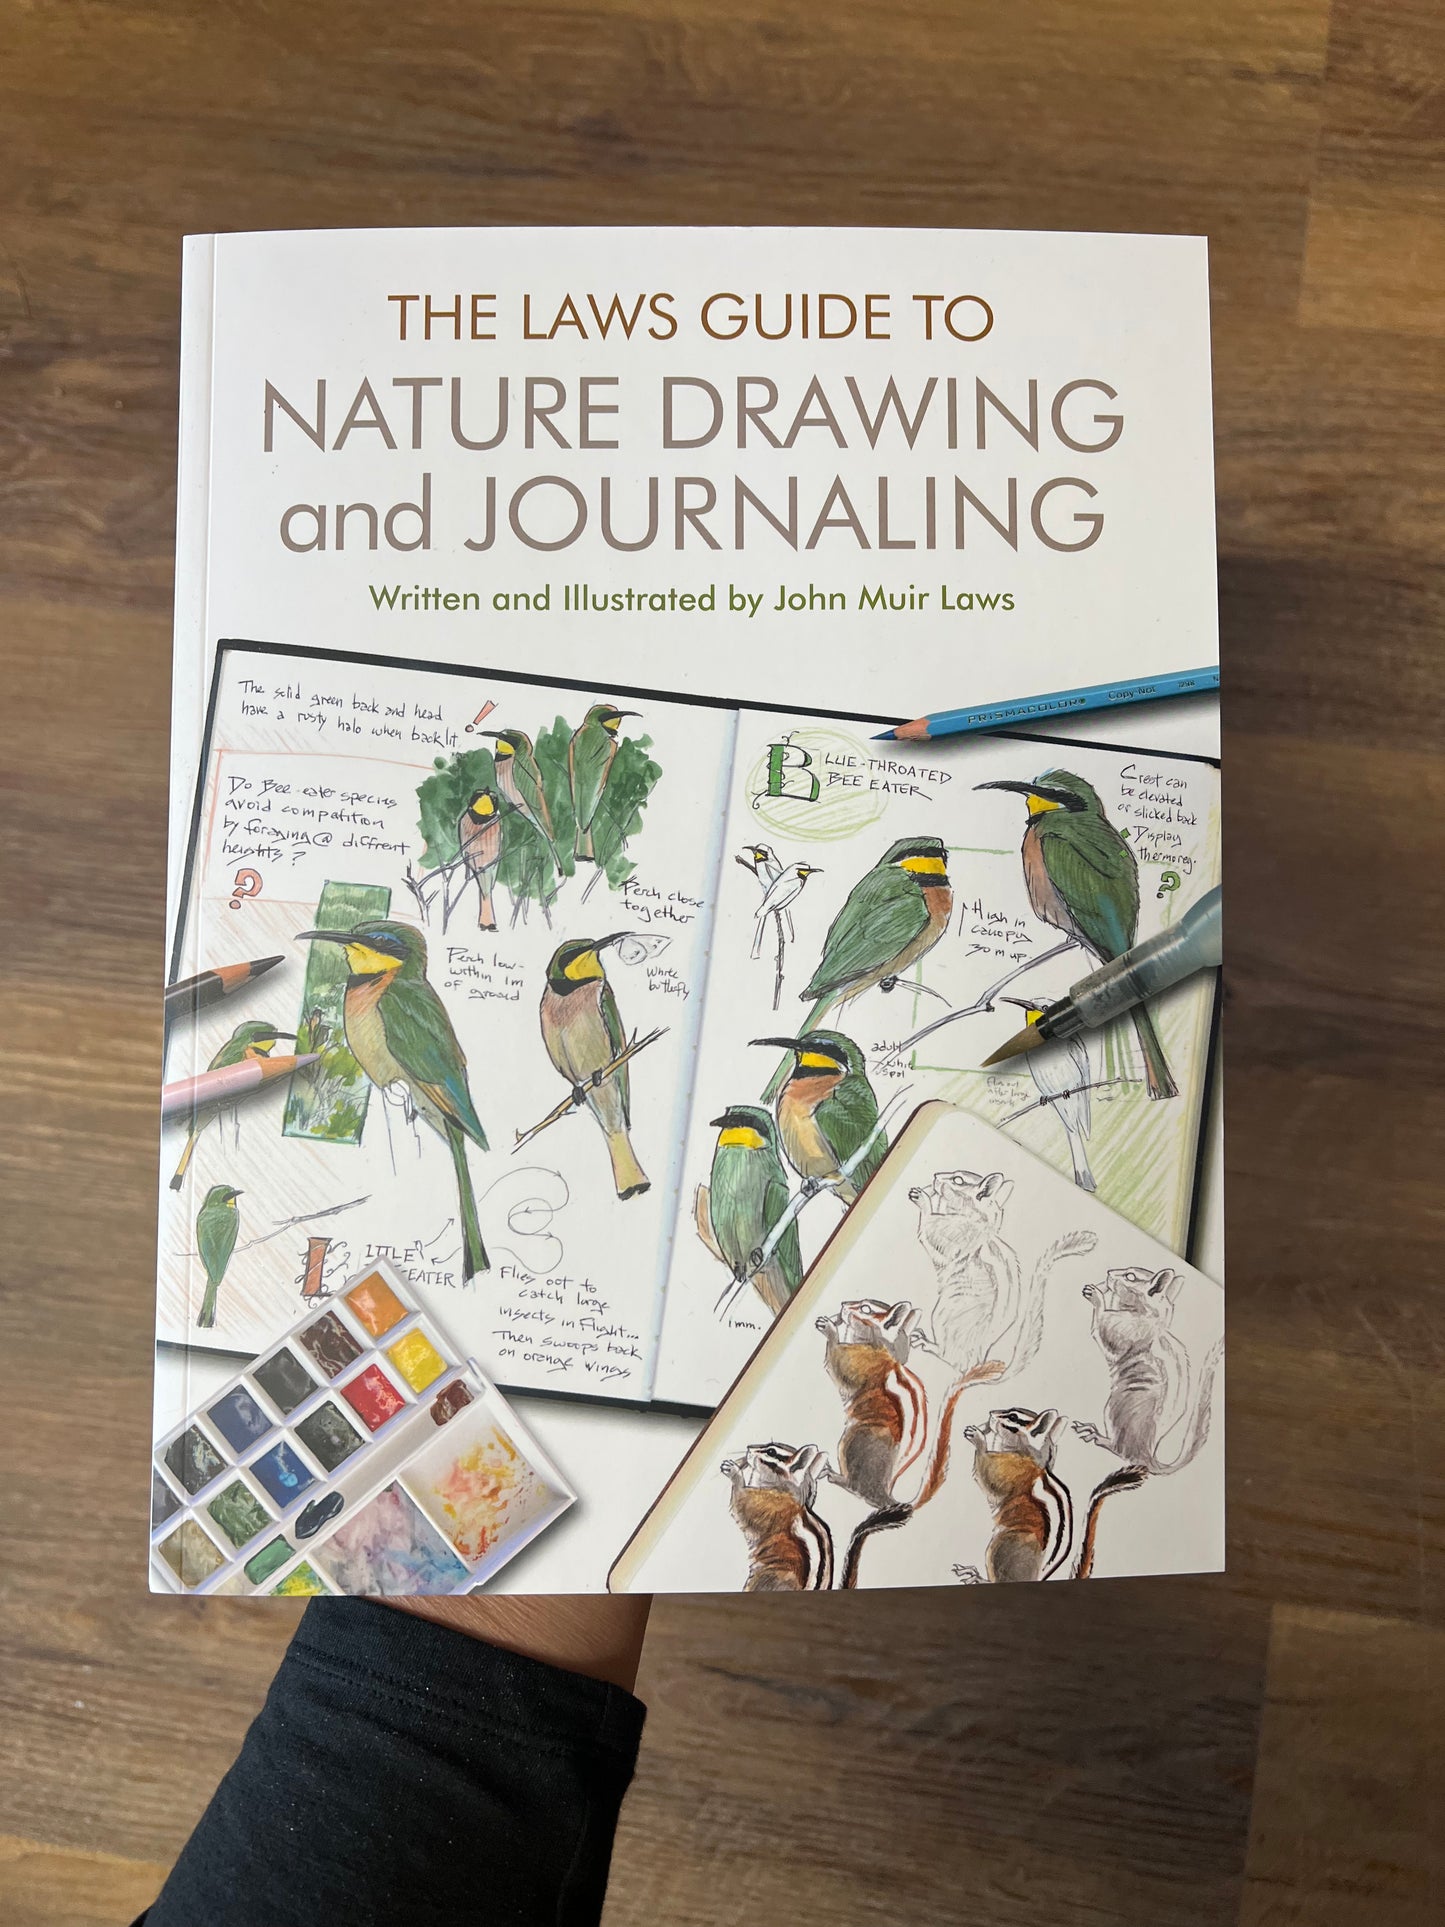 The Laws Guide to Nature Drawing & Journaling